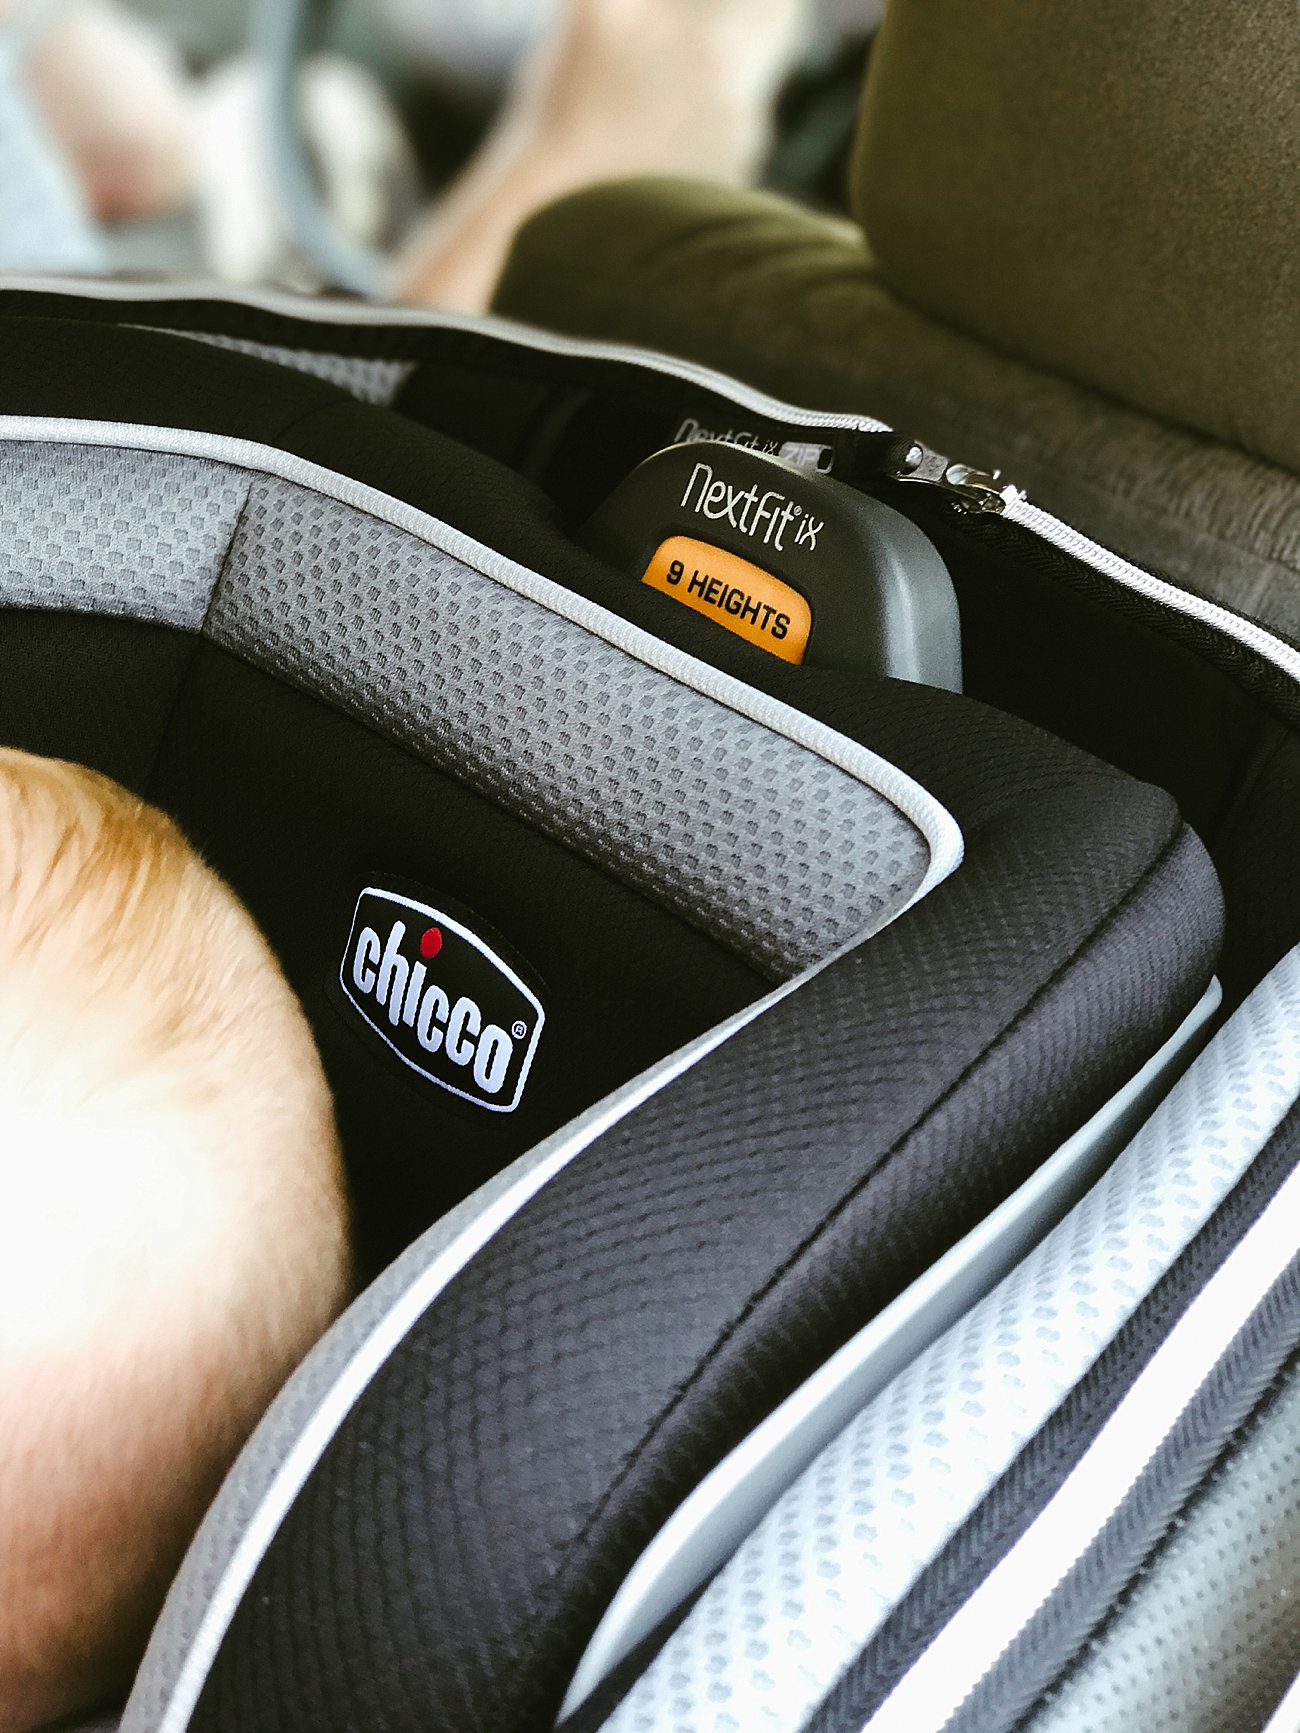 Chicco NextFit® iX - TurnAfter2 Campaign - Best rear facing convertible car seat that can fit in a pickup truck (6) - Why I Am Passionate About Extended Rear Facing (& Chicco Fit2 Giveaway!) by North Carolina mom blogger Still Being Molly